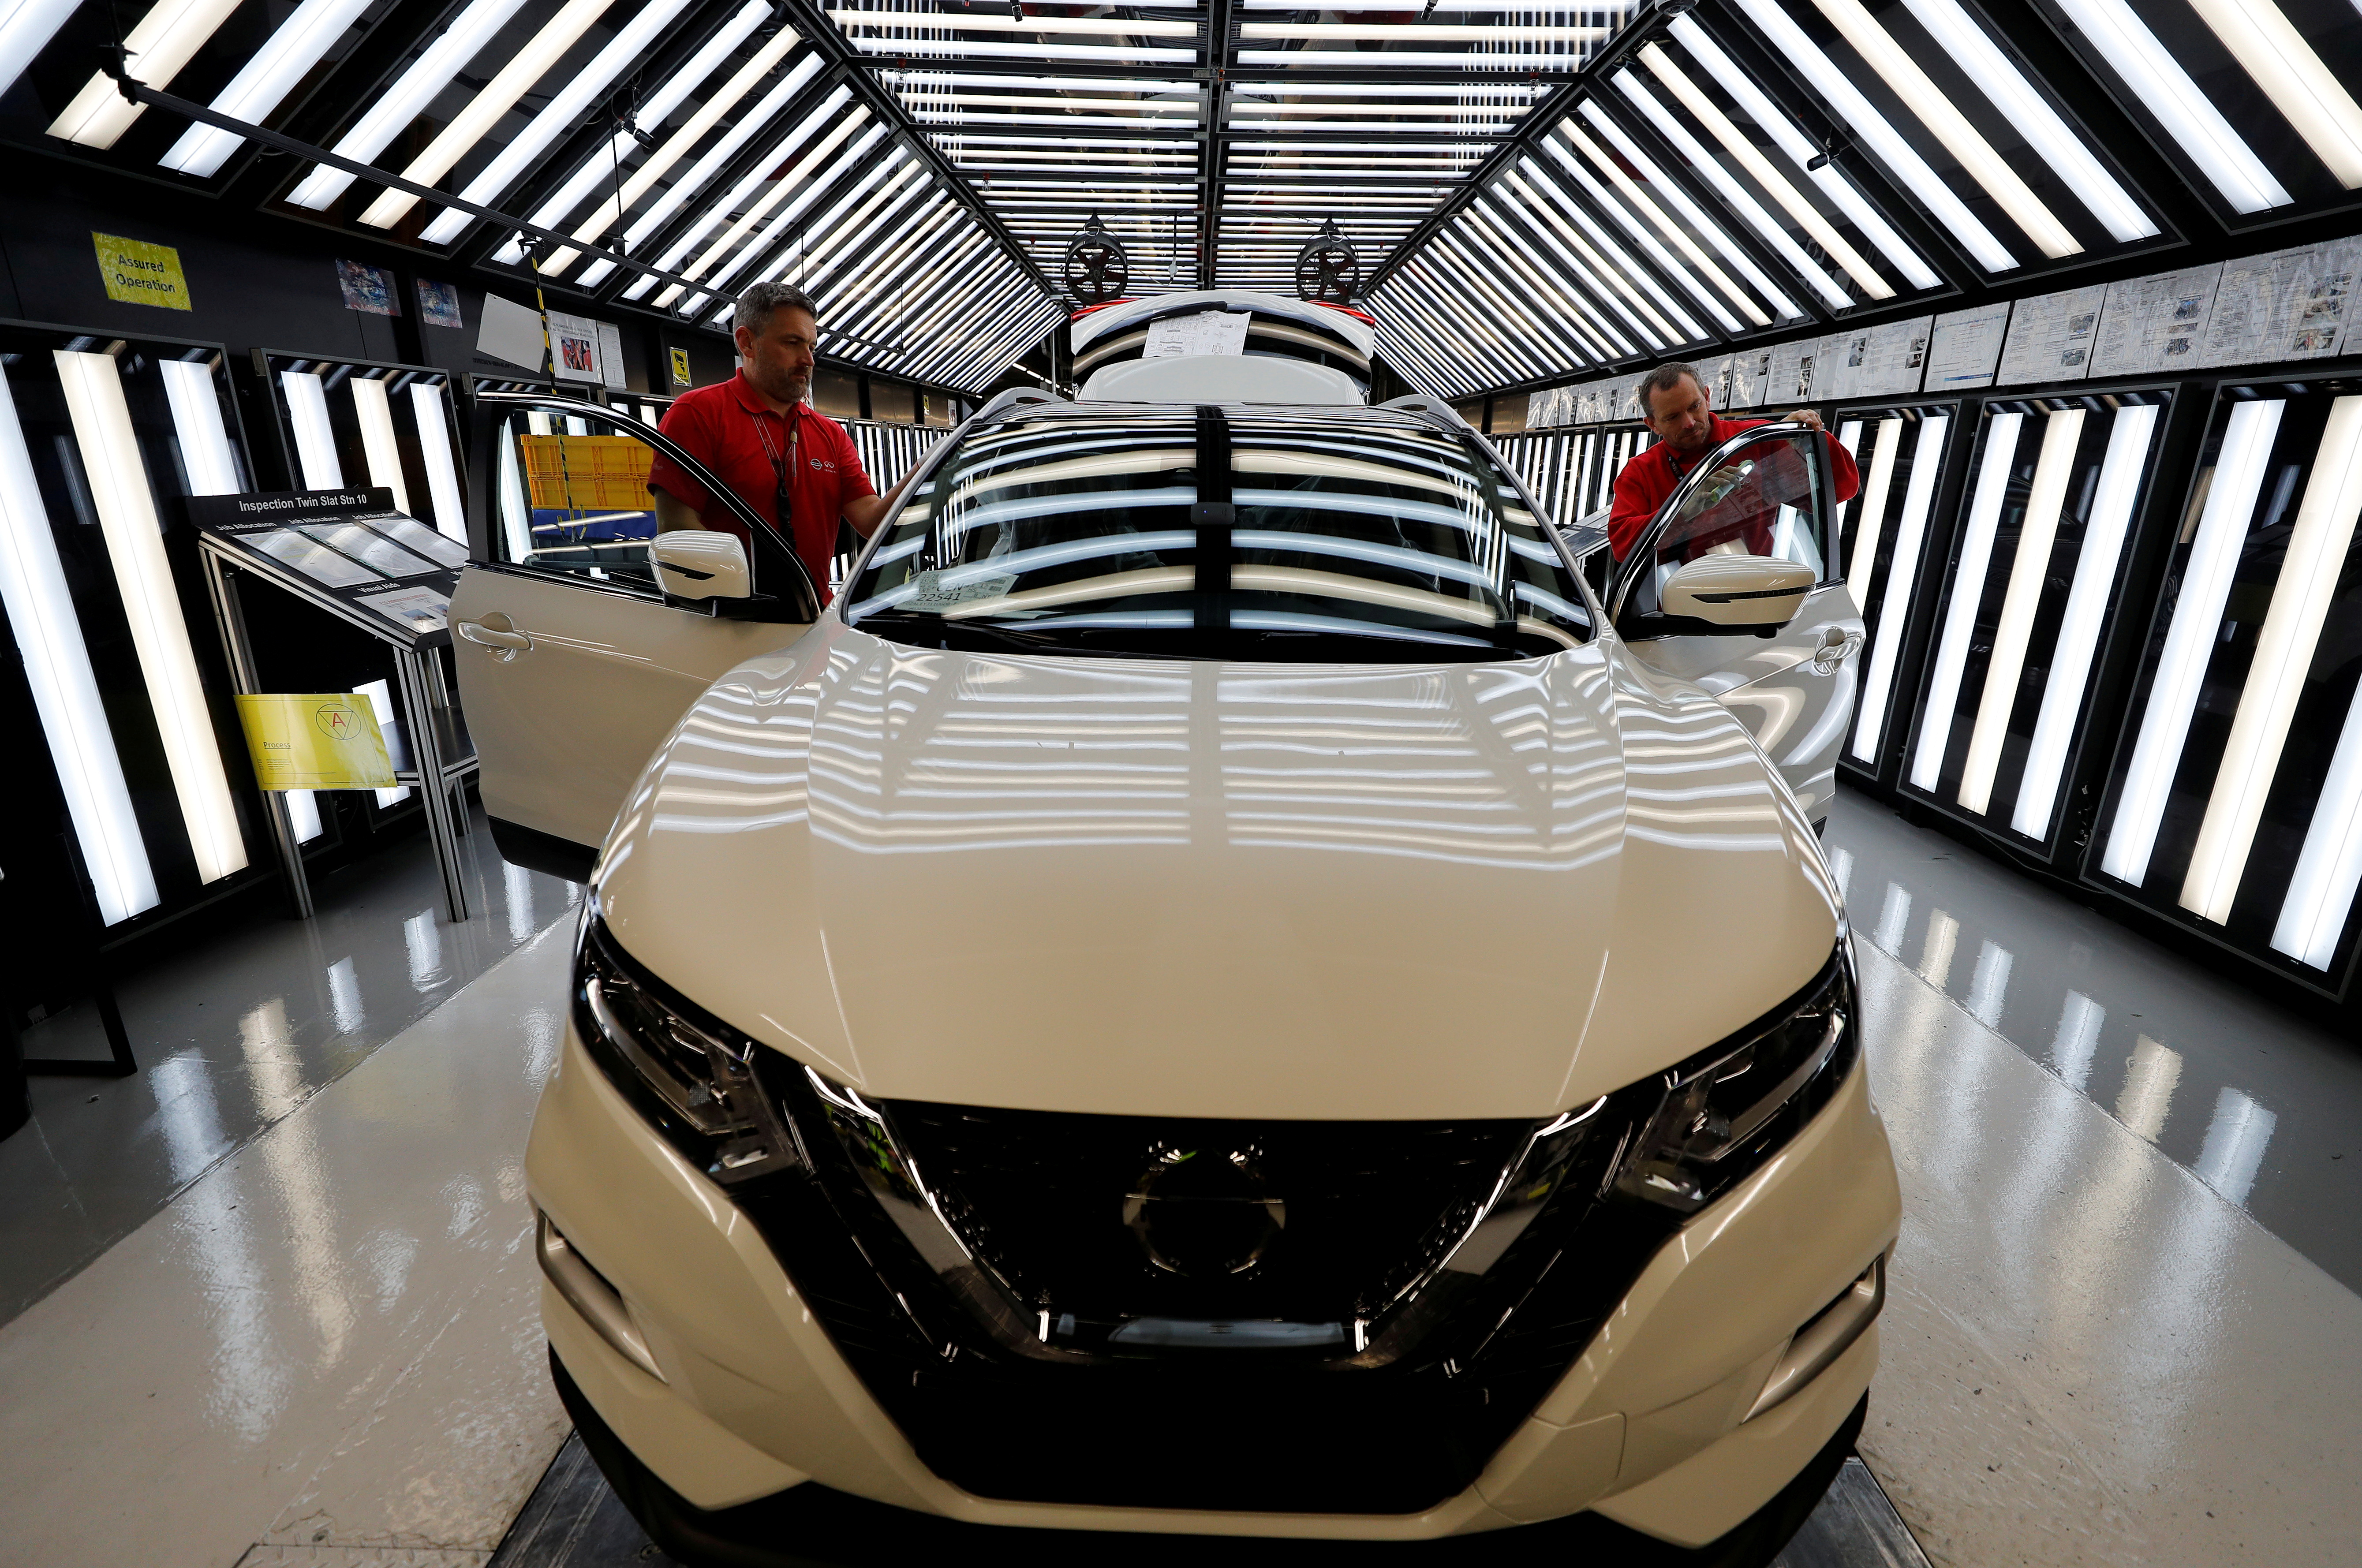 Workers are seen on the production line at Nissan's car plant in Sunderland Britain